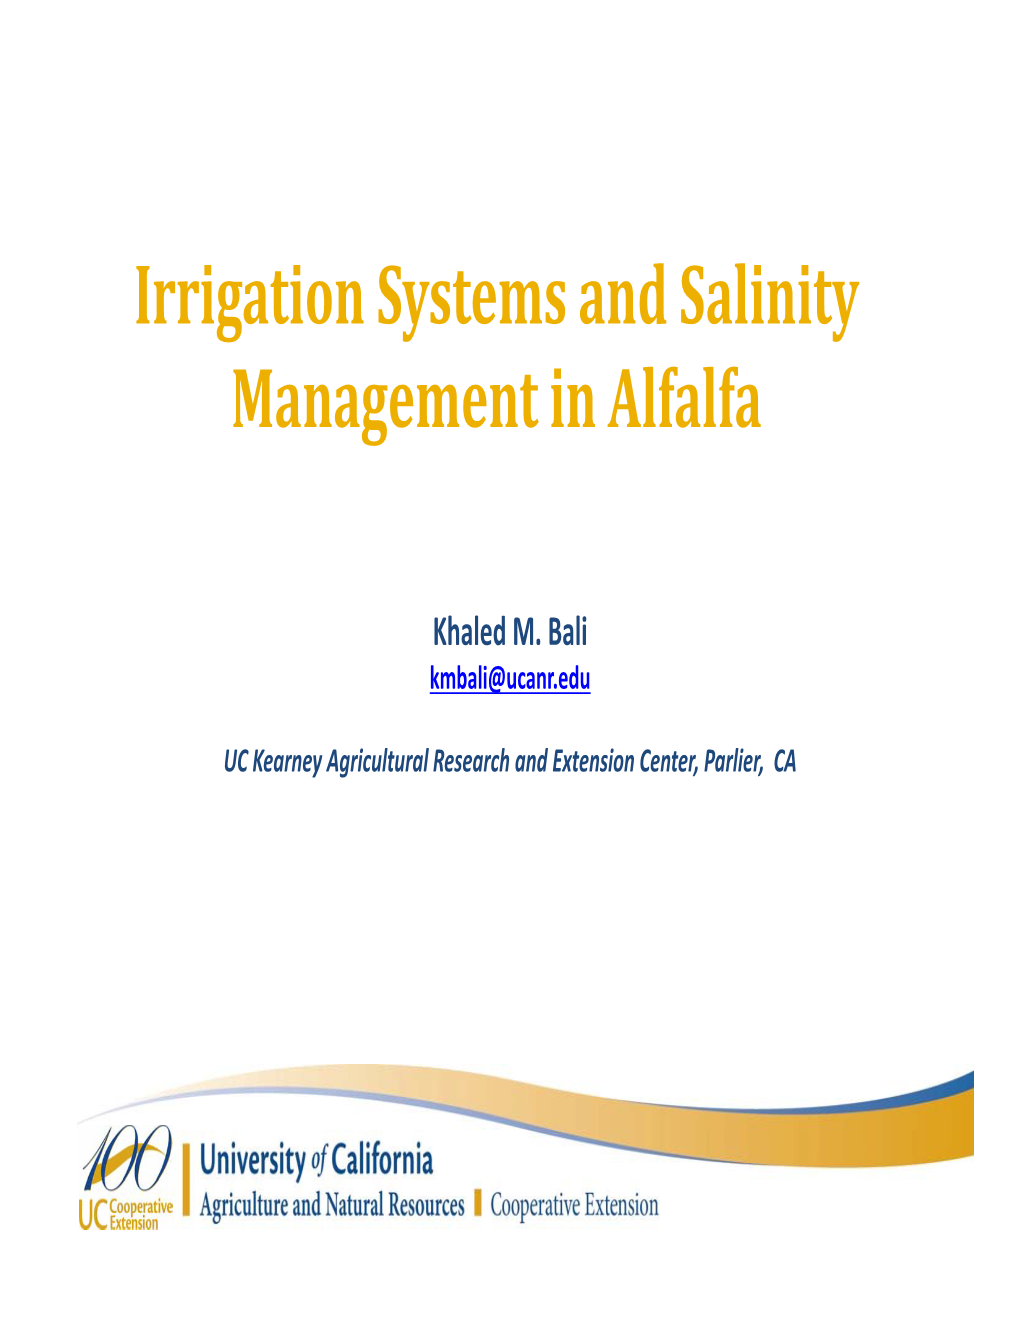 Irrigation Systems and Salinity Management in Alfalfa